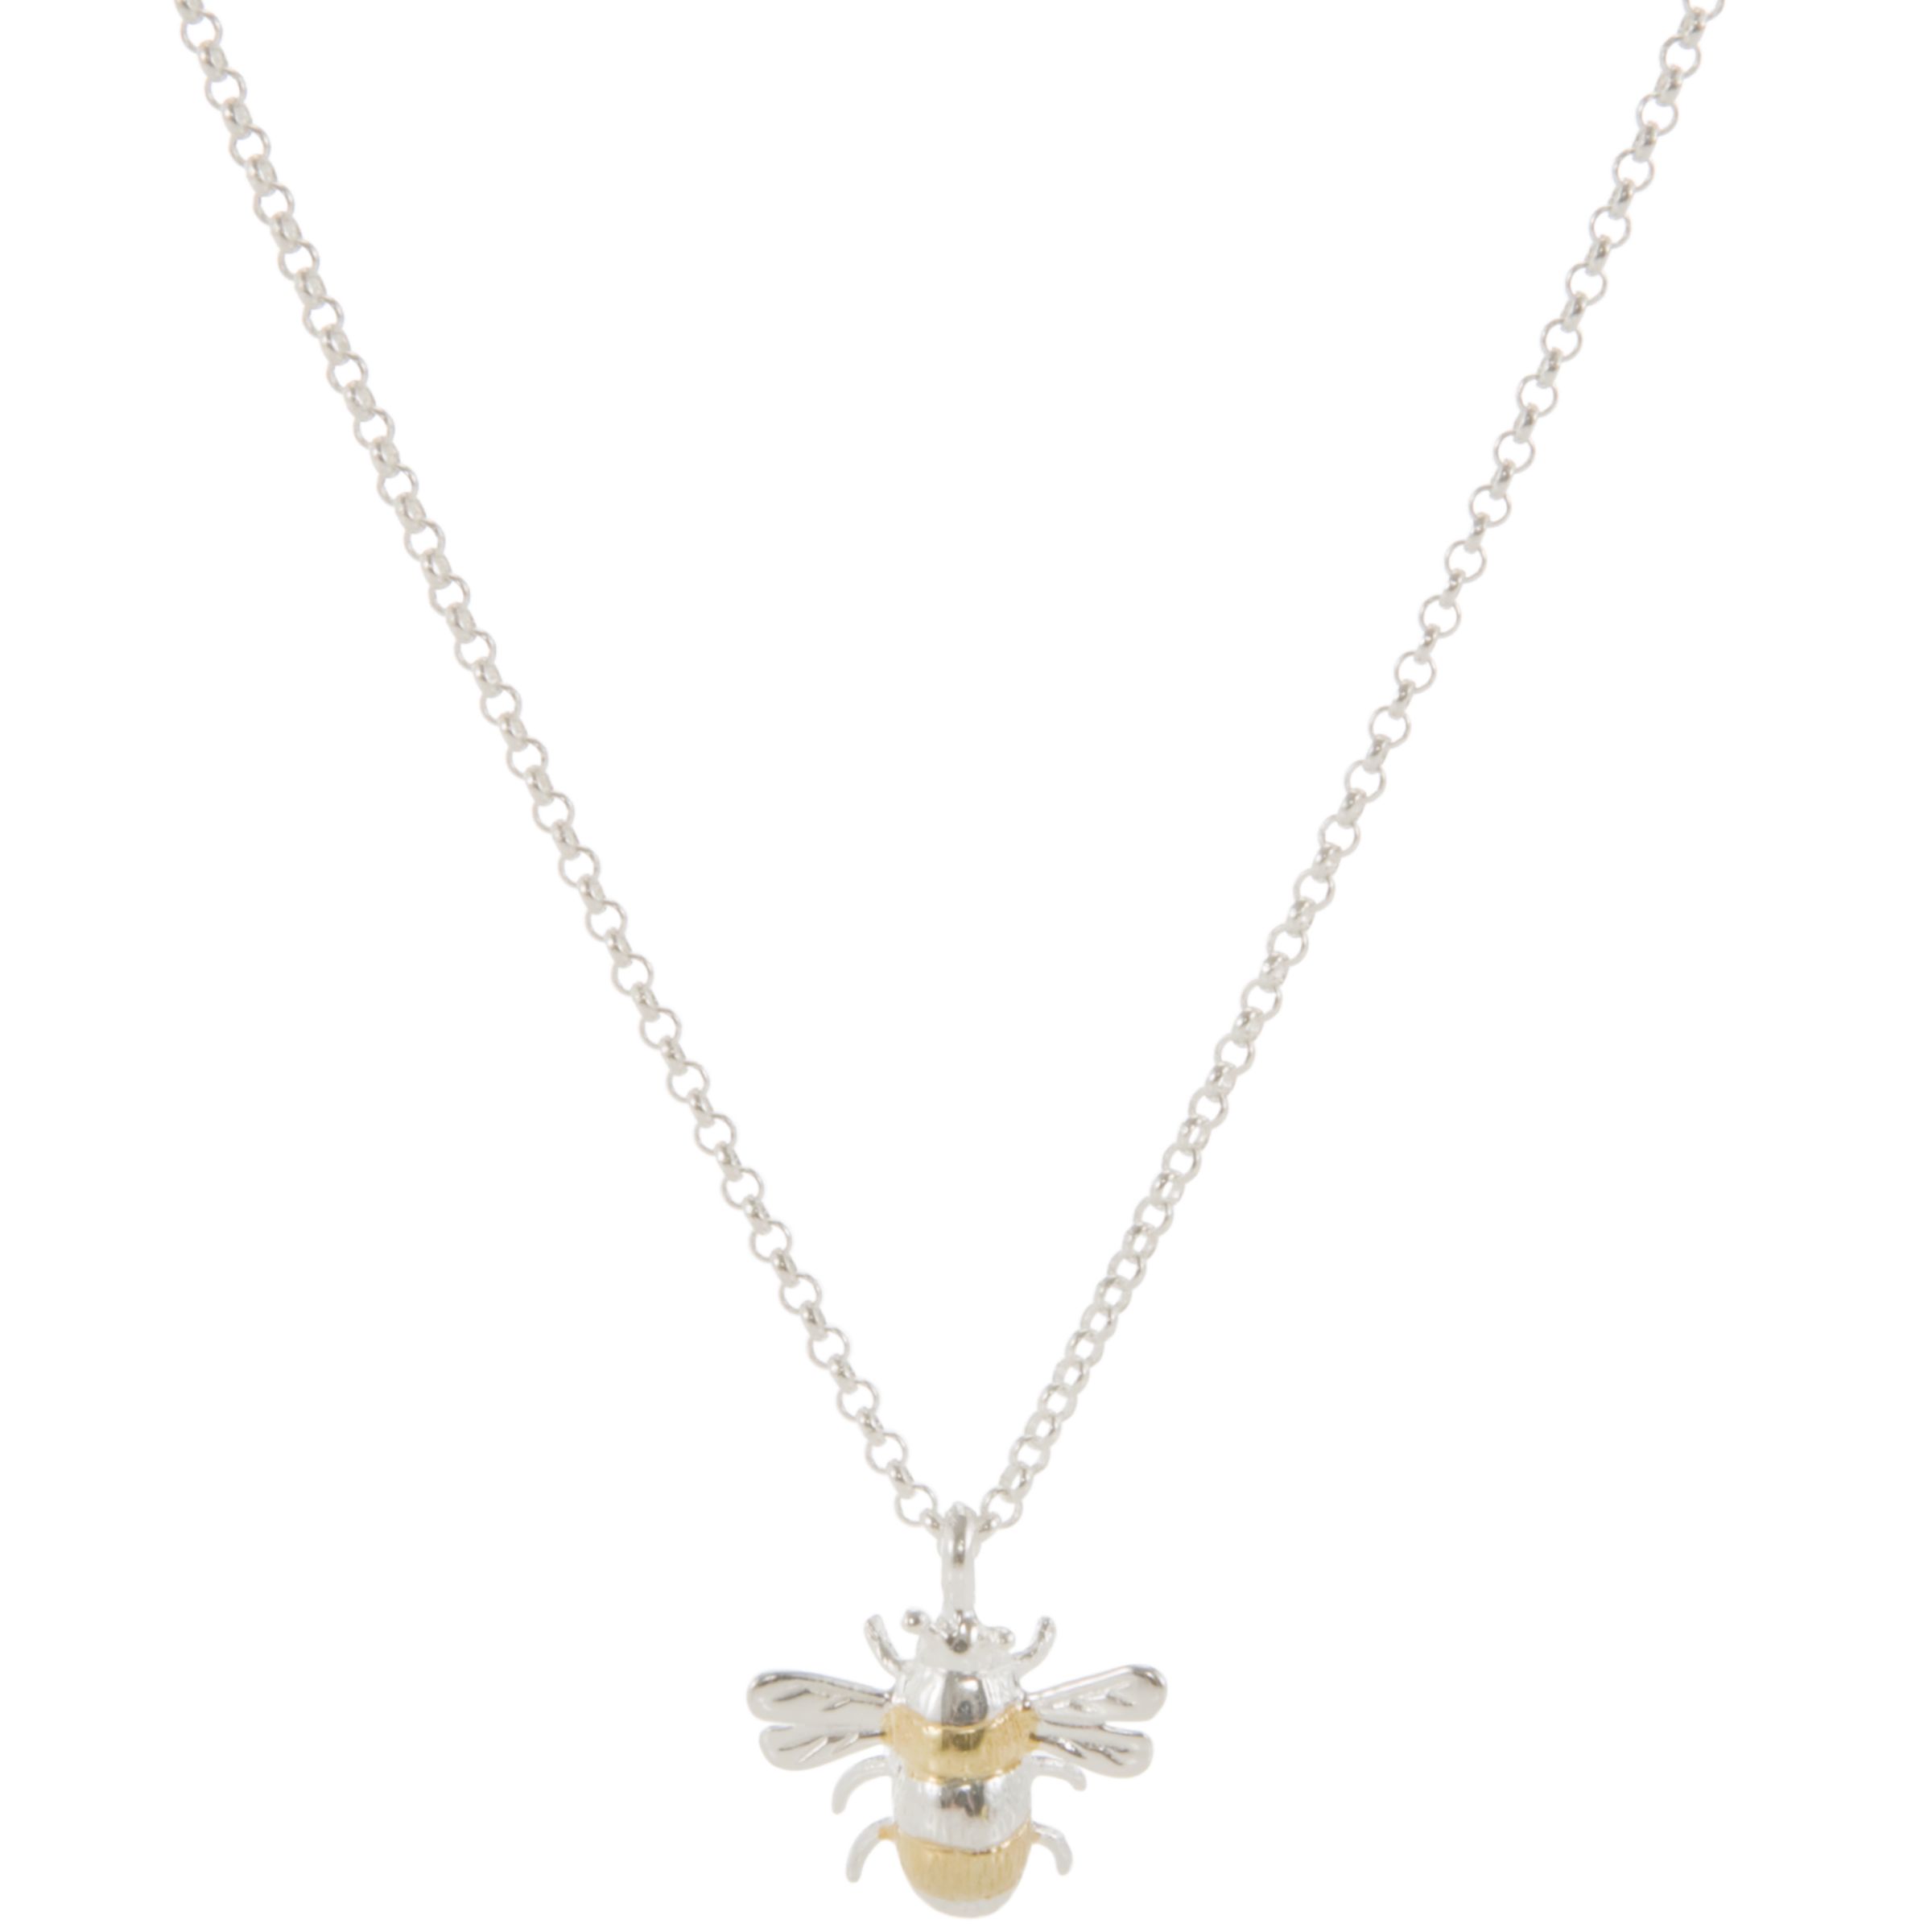 Martick Silver & Gold Plated Bee Pendant Necklace